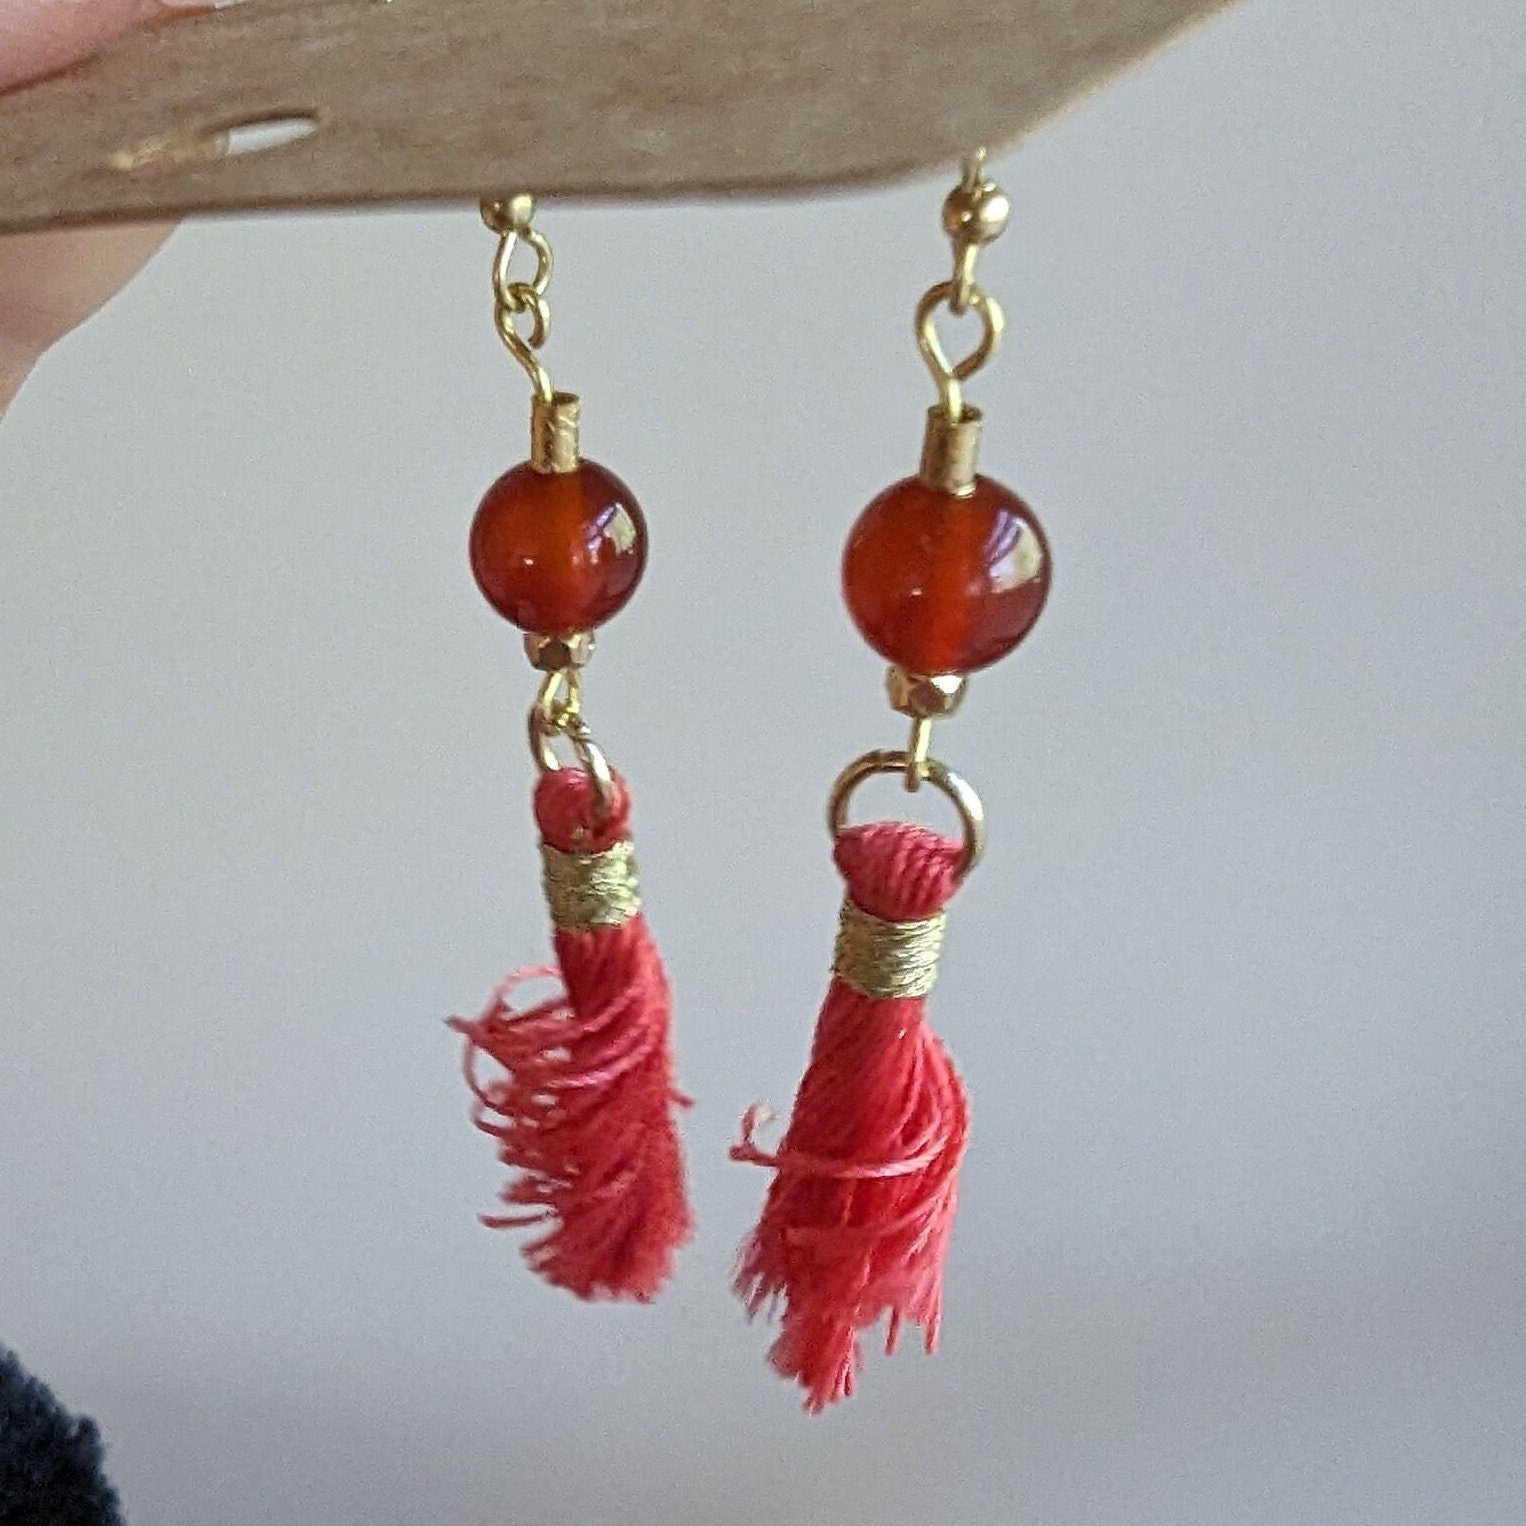 Chinese Red Agate and Red Tassel Earrings Asian Palace Inspired Earrings Collection